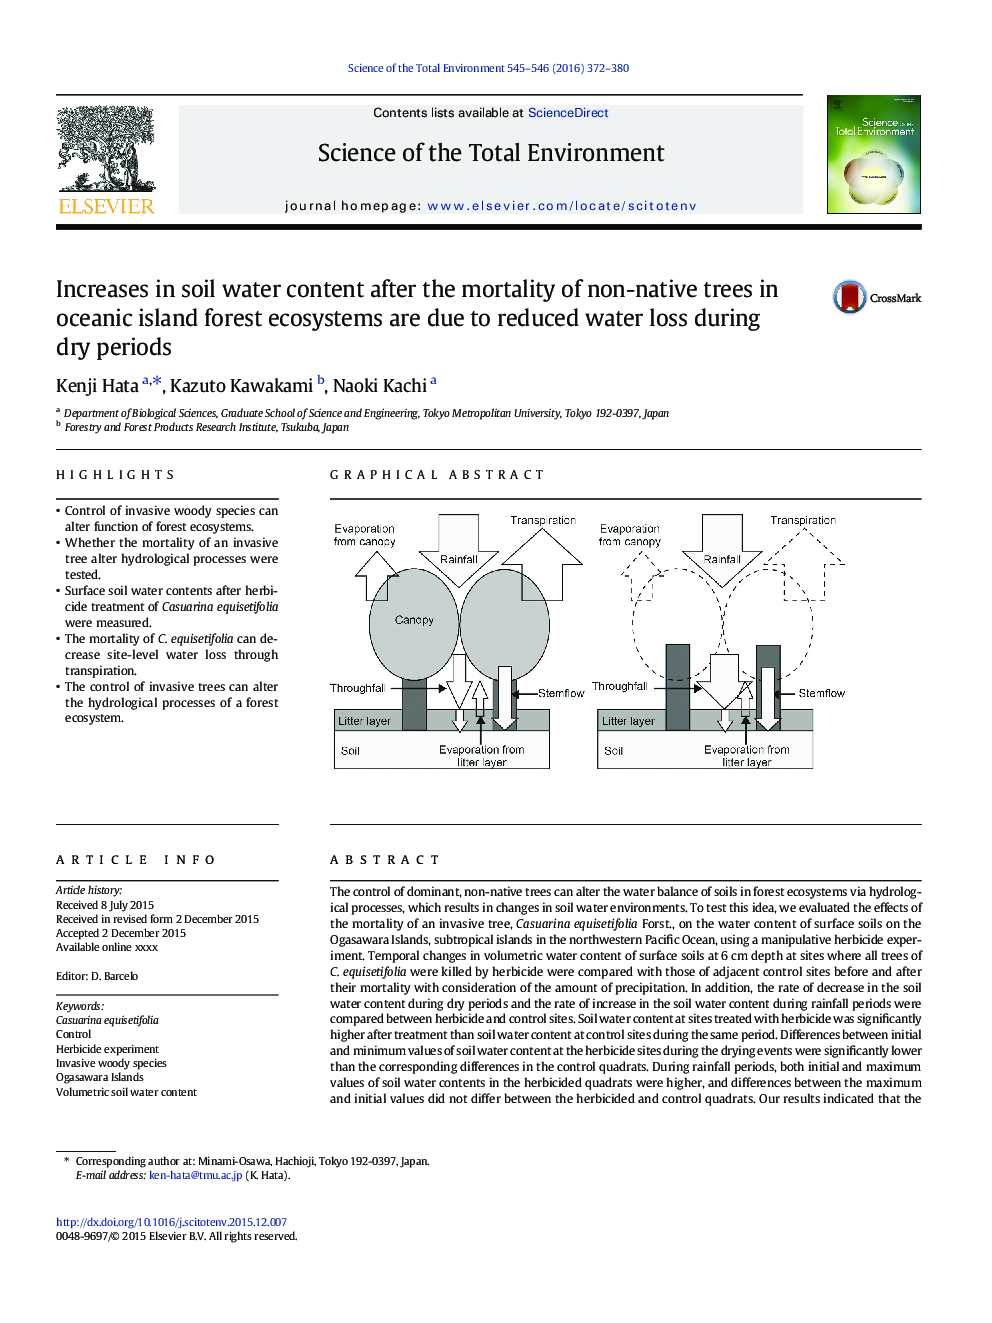 Increases in soil water content after the mortality of non-native trees in oceanic island forest ecosystems are due to reduced water loss during dry periods